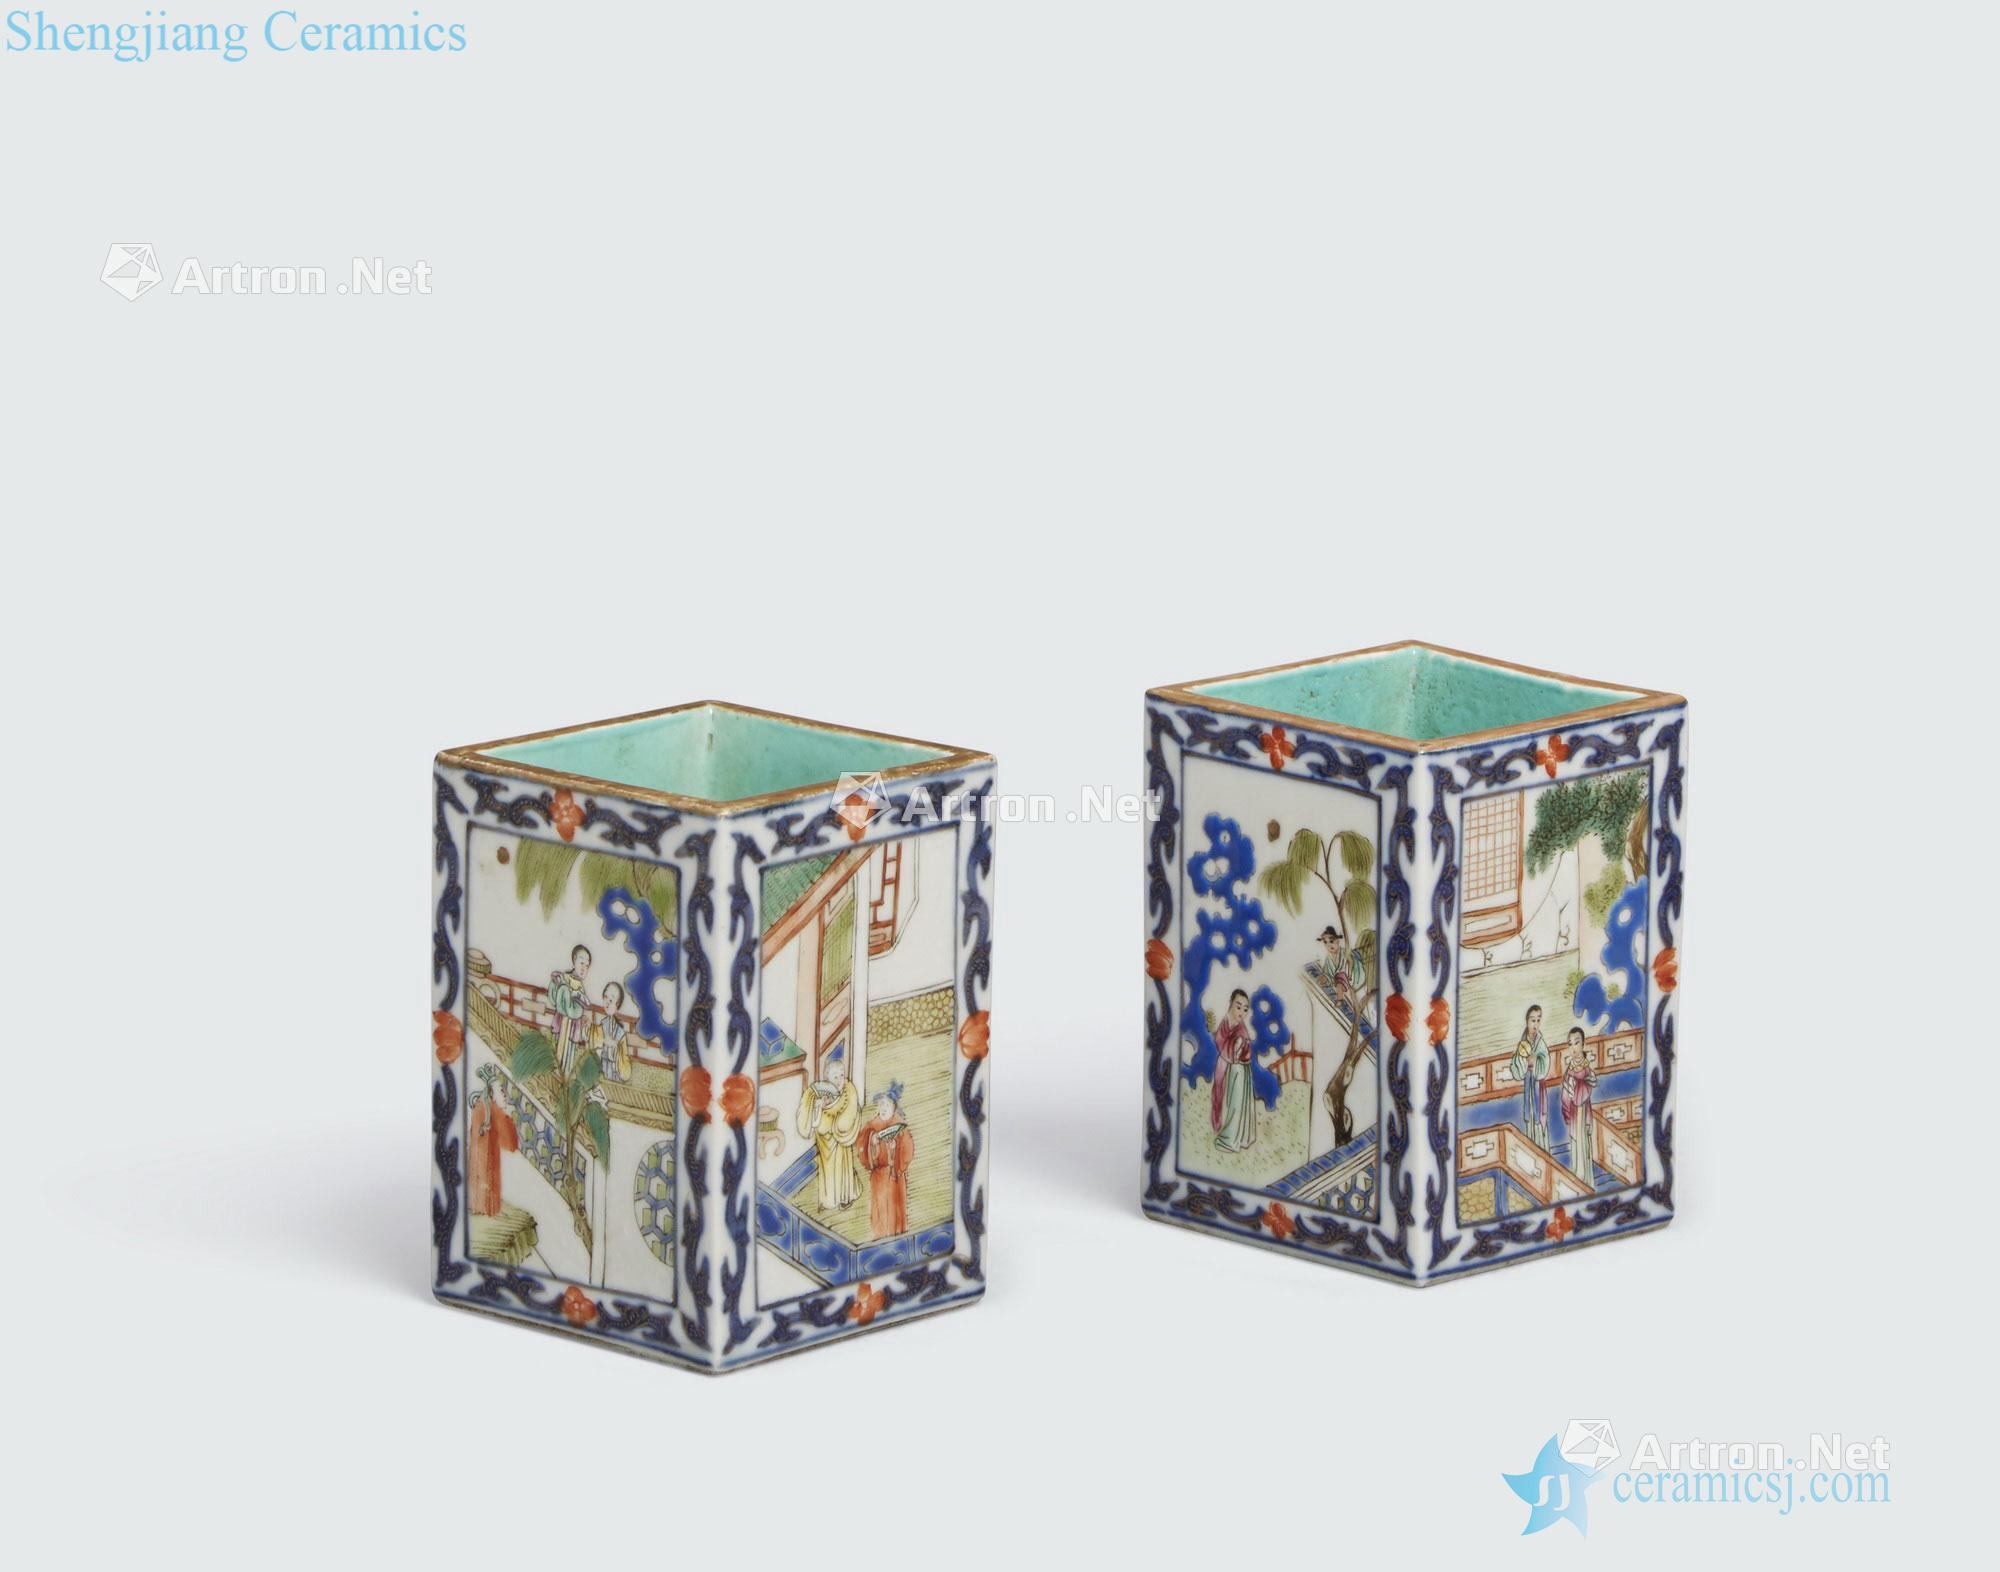 The 19 th century A PAIR OF UNDERGLAZE BLUE AND FAMILLE ROSE ENAMELED PORCELAIN BRUSH POTS